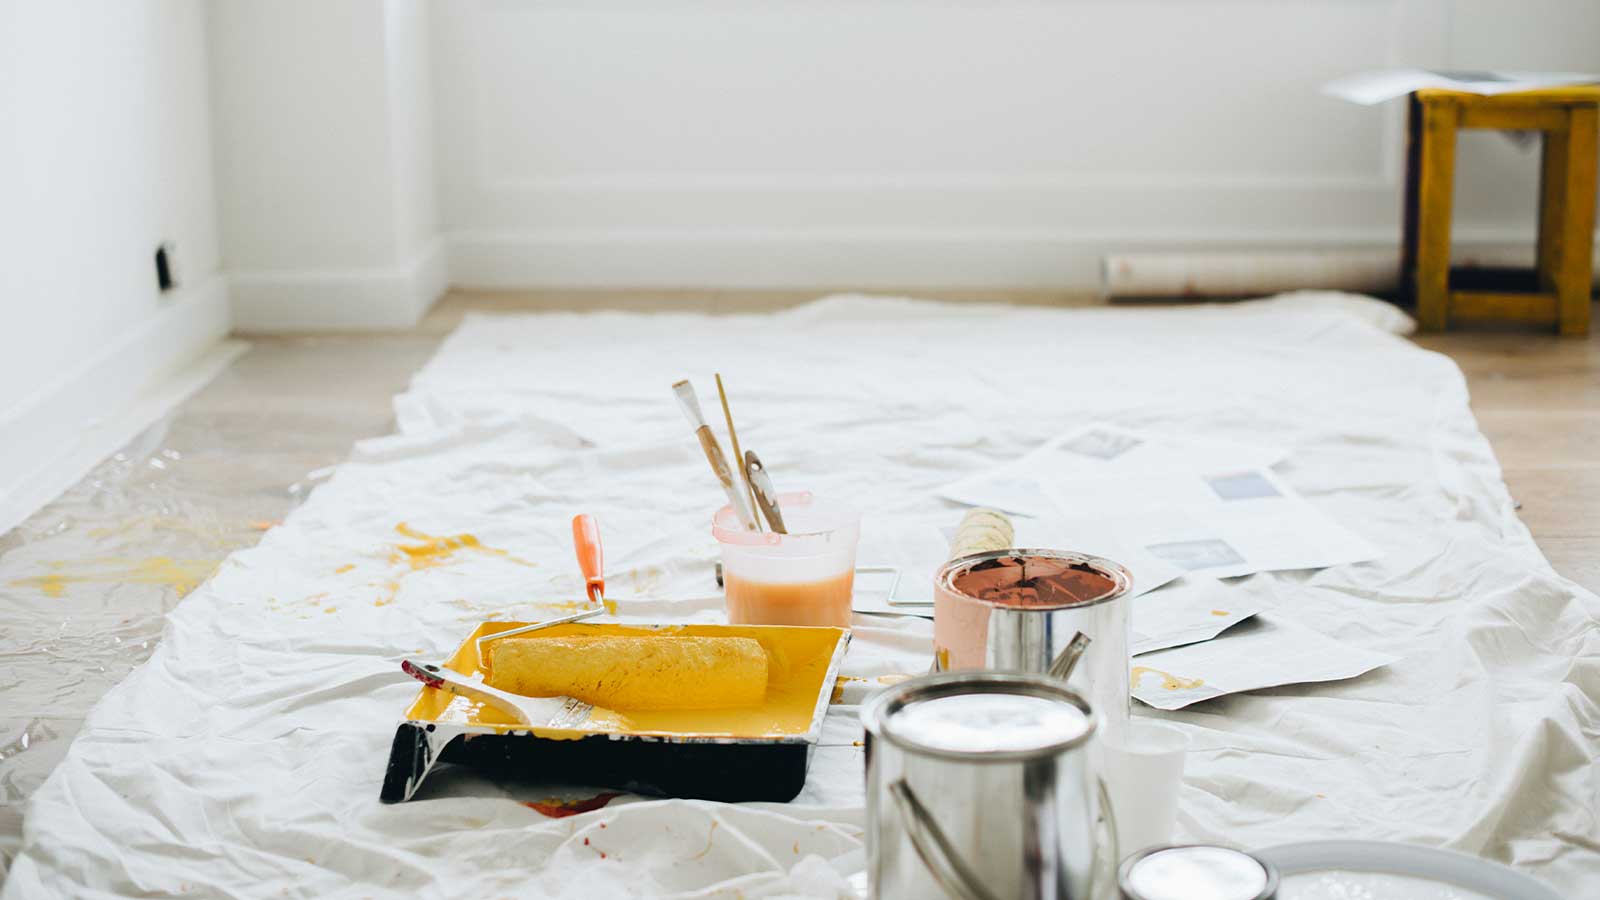 How to Prepare Your Space for Painting